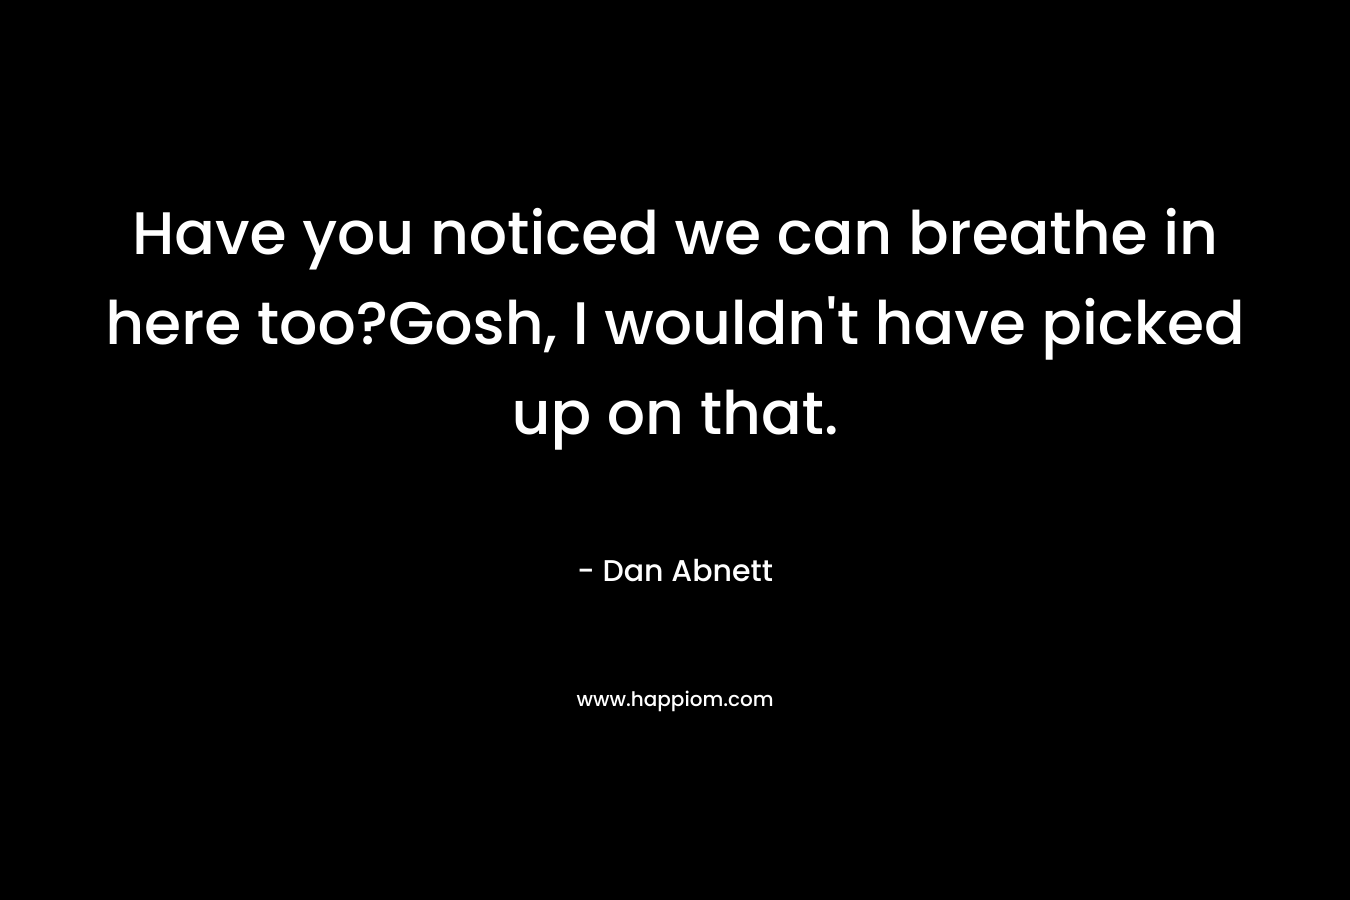 Have you noticed we can breathe in here too?Gosh, I wouldn’t have picked up on that. – Dan Abnett